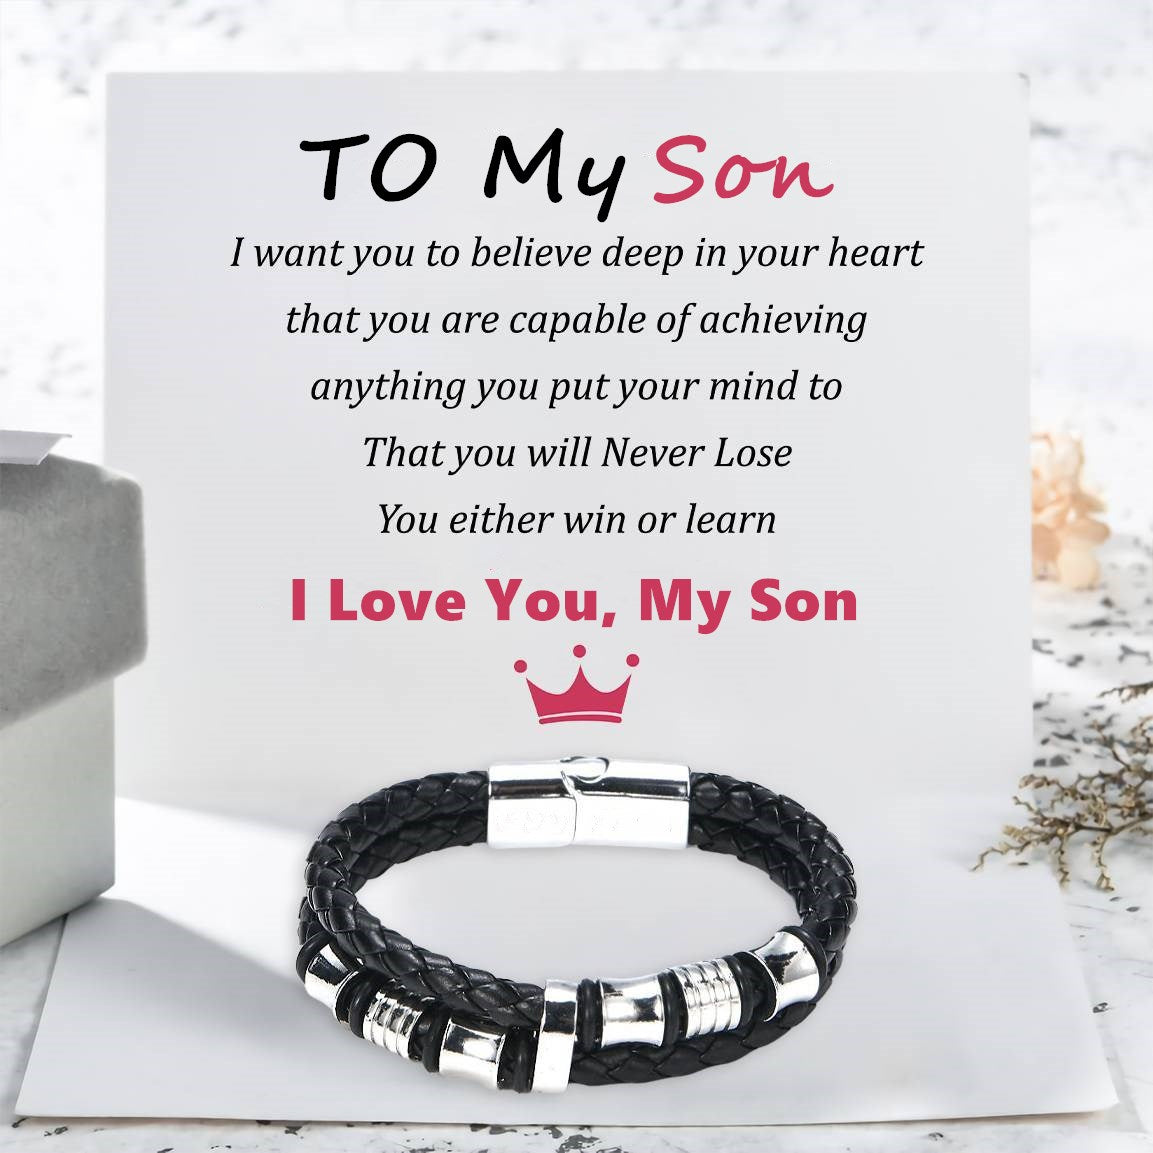 To My Son - You Will Never Lose - Bracelet